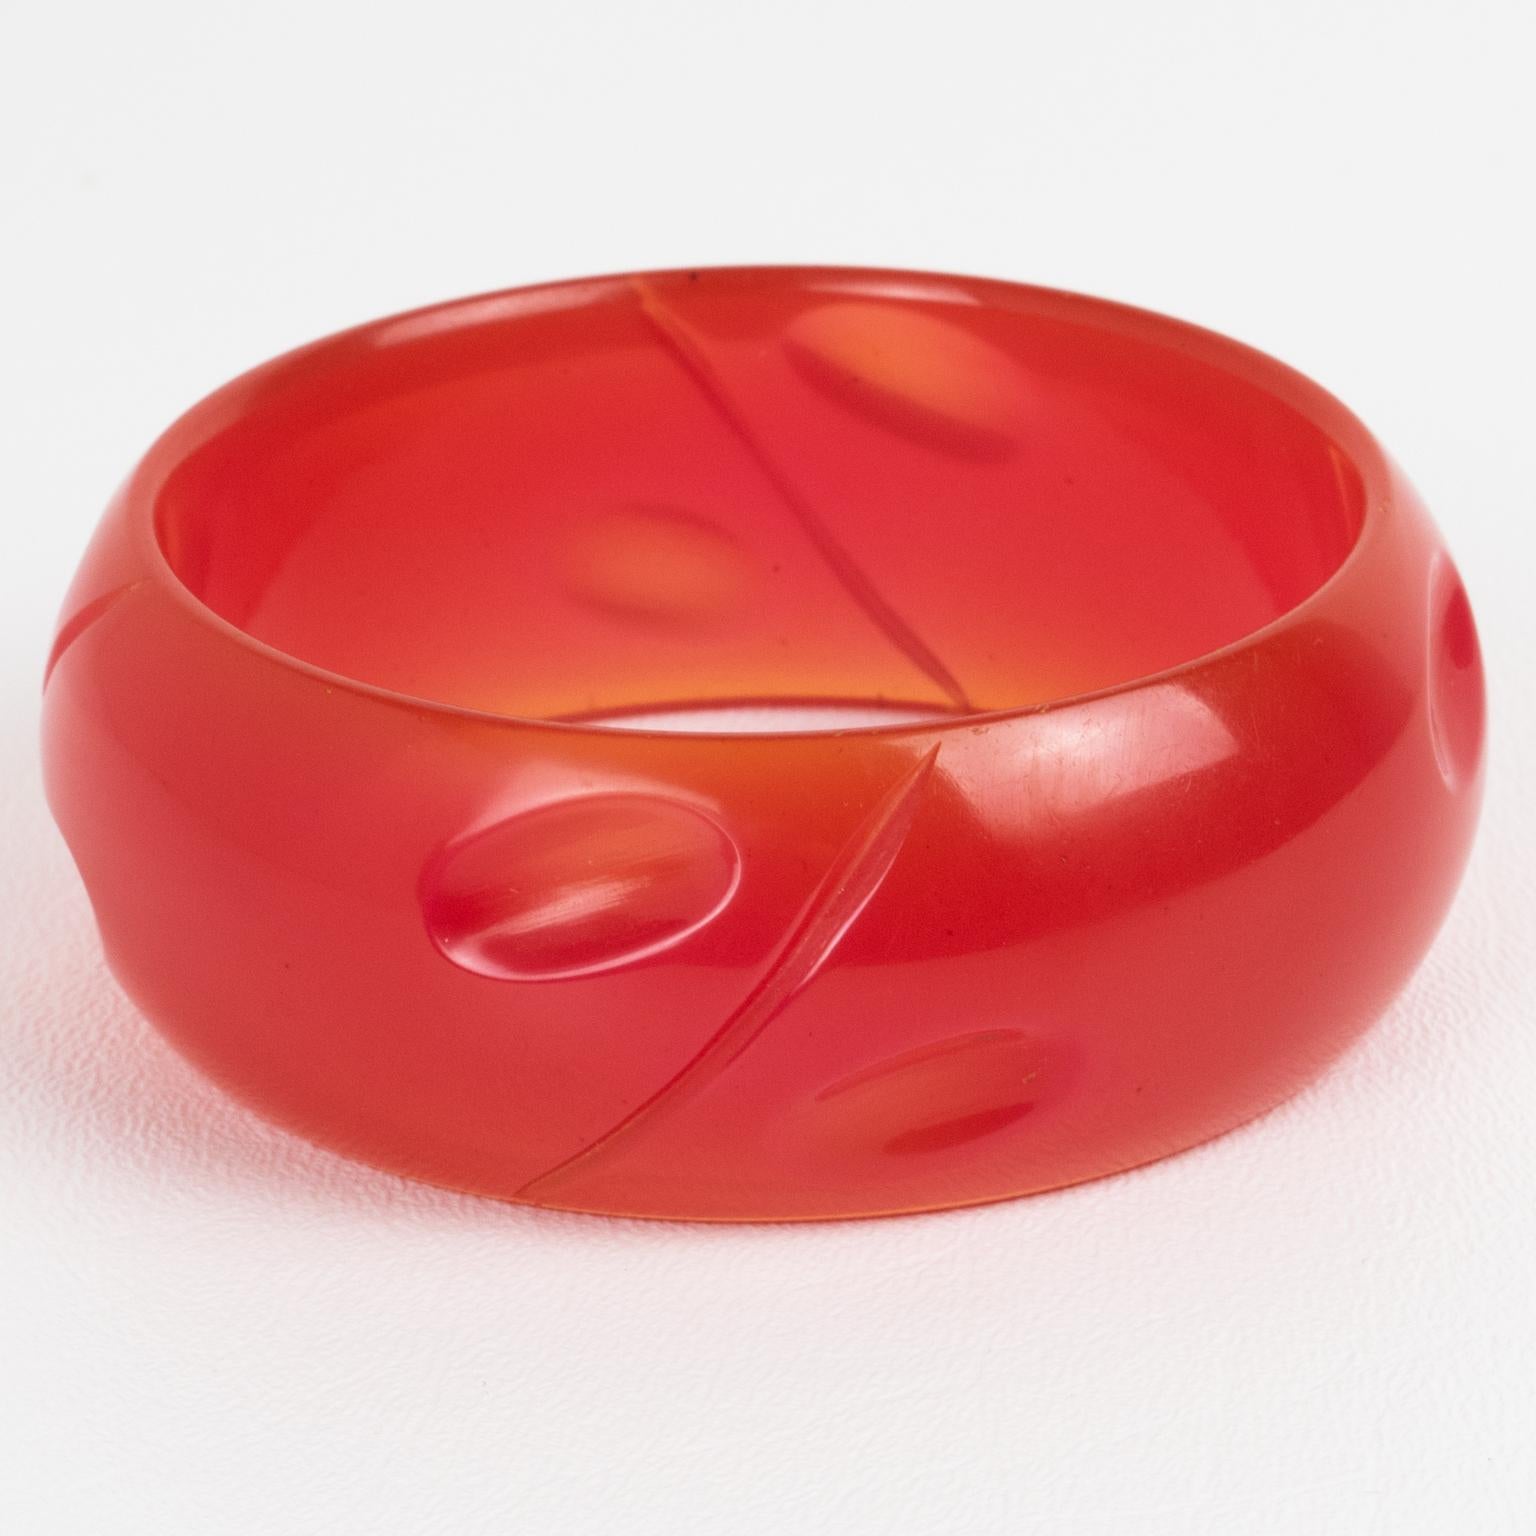 This is a lovely hot pink watermelon Bakelite bracelet bangle. It features a chunky domed shape with a geometric and deeply carved design. The color is an intense neon pink plain tone, completely translucent. 
Measurements: Inside across is 2.63 in